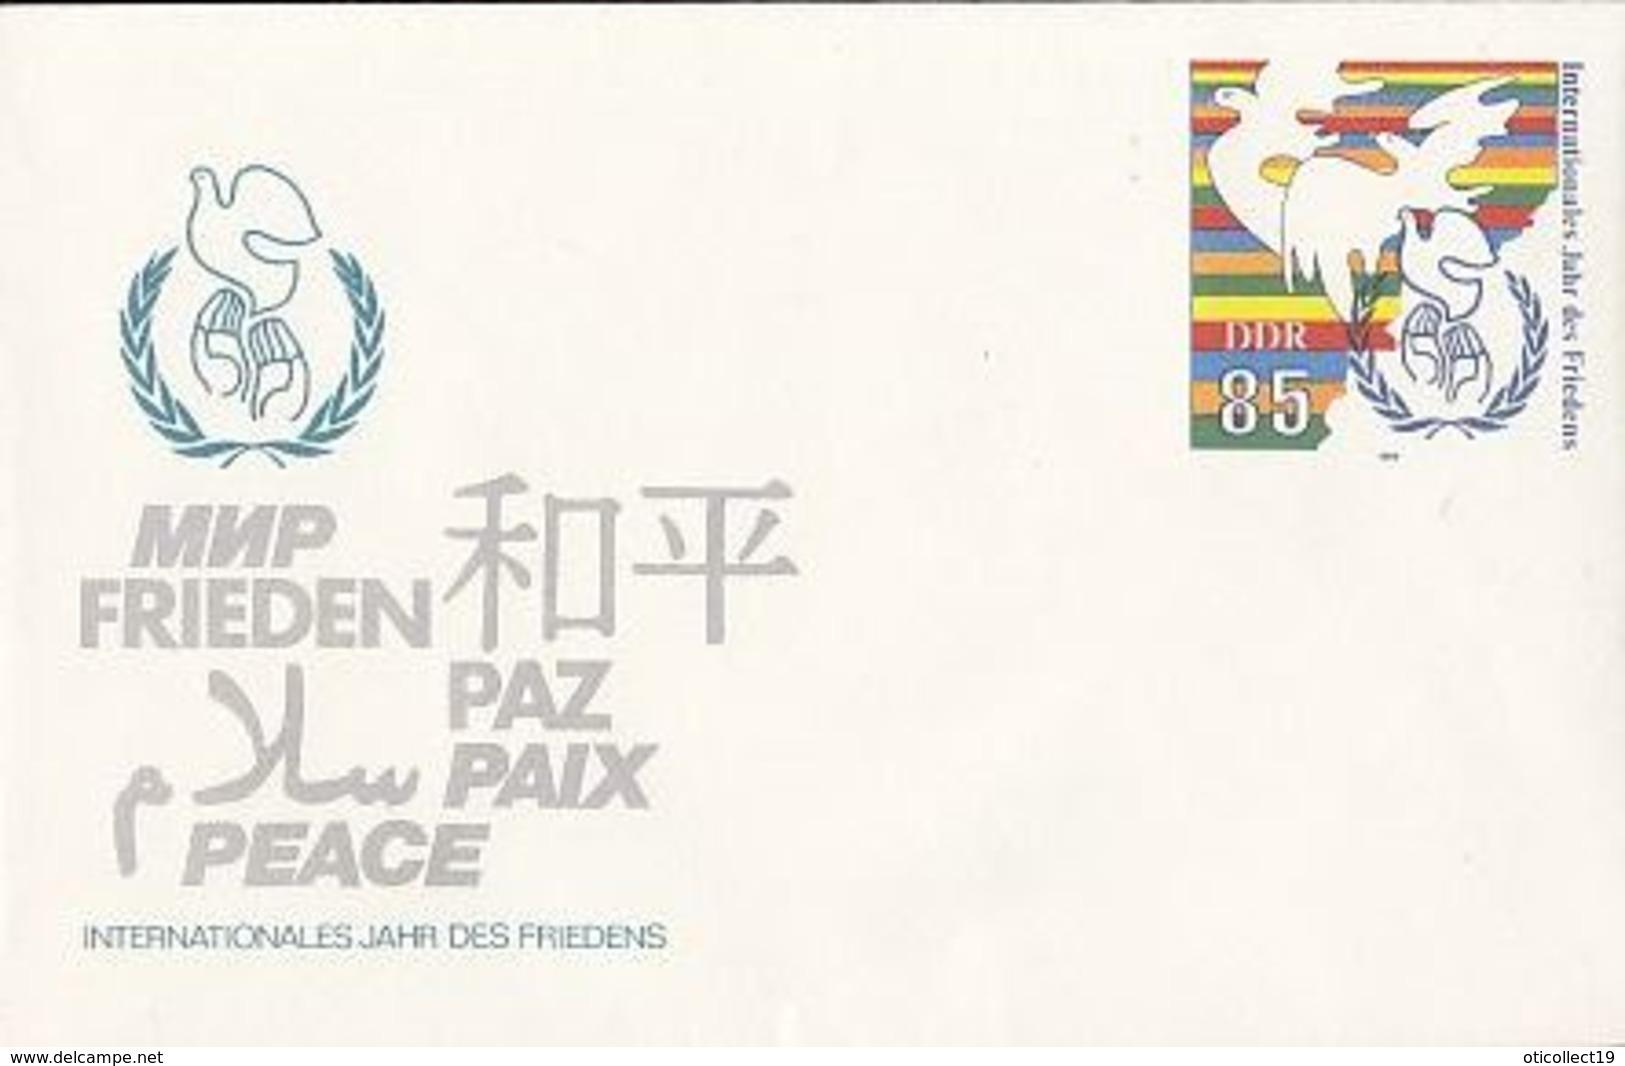 INTERNATIONAL YEAR OF FRIENDSHIP, PEACE, COVER STATIONERY, 1986, GERMANY-DDR - Covers - Mint